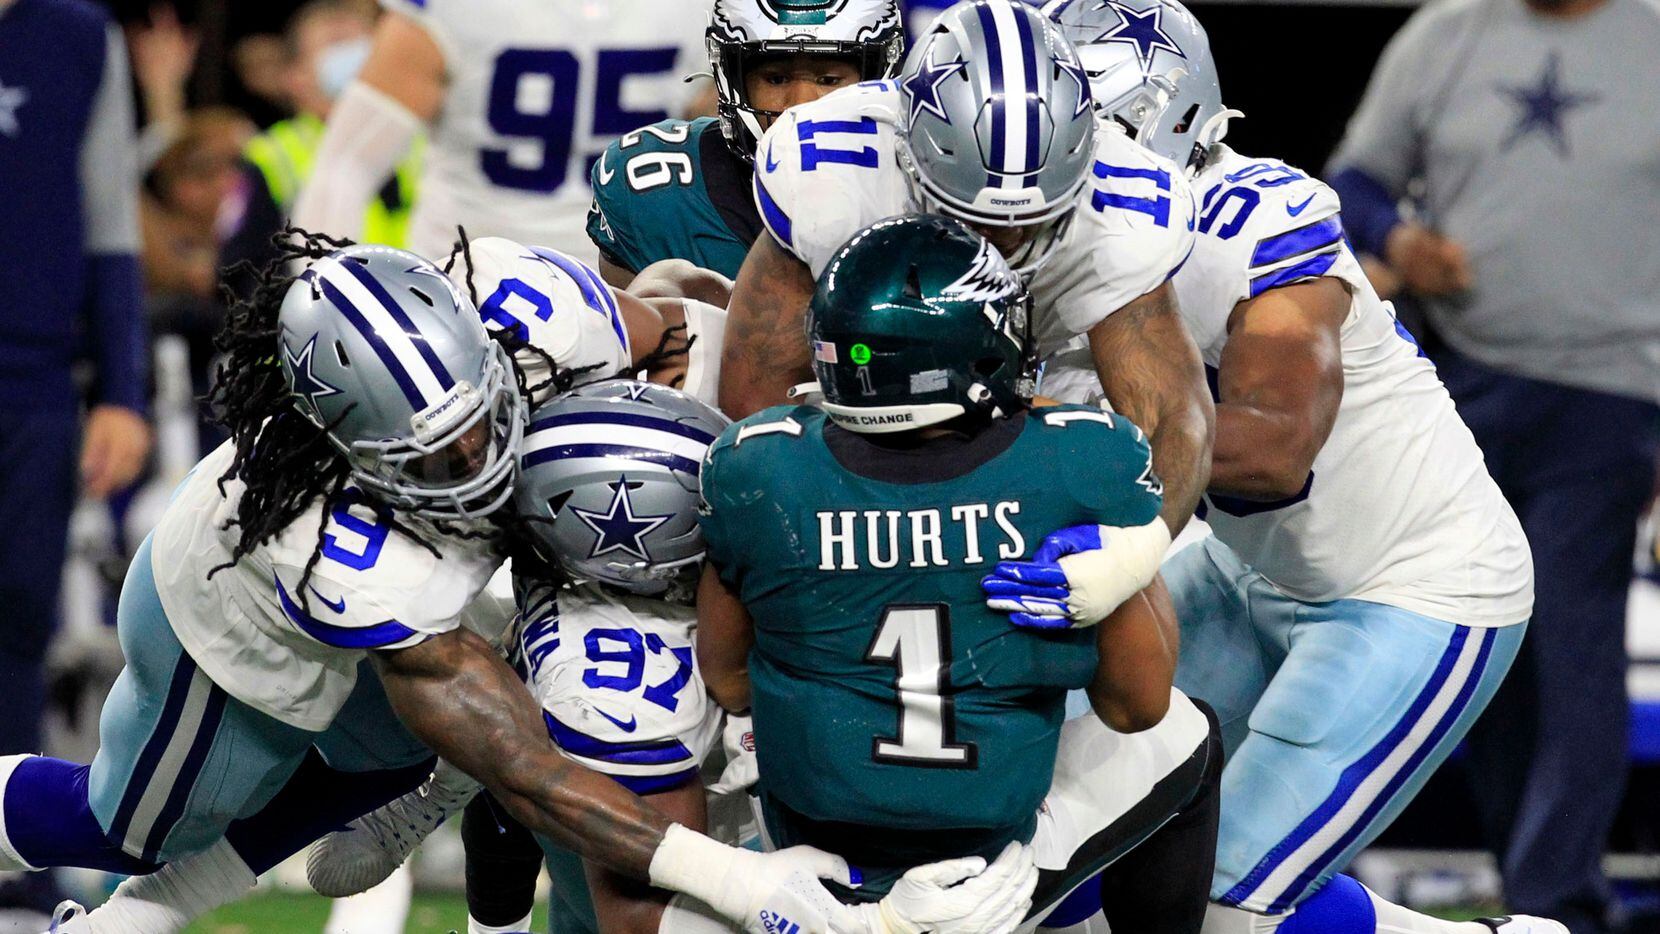 Philadelphia Eagles quarterback Jalen Hurts (1) is swarmed by Dallas Cowboys defenders, including middle linebacker Jaylon Smith (9); defensive tackle Osa Odighizuwa (97), and linebacker Micah Parsons (11) during the second half of a NFL football game at AT&T Stadium in Arlington on Monday, September 27, 2021.